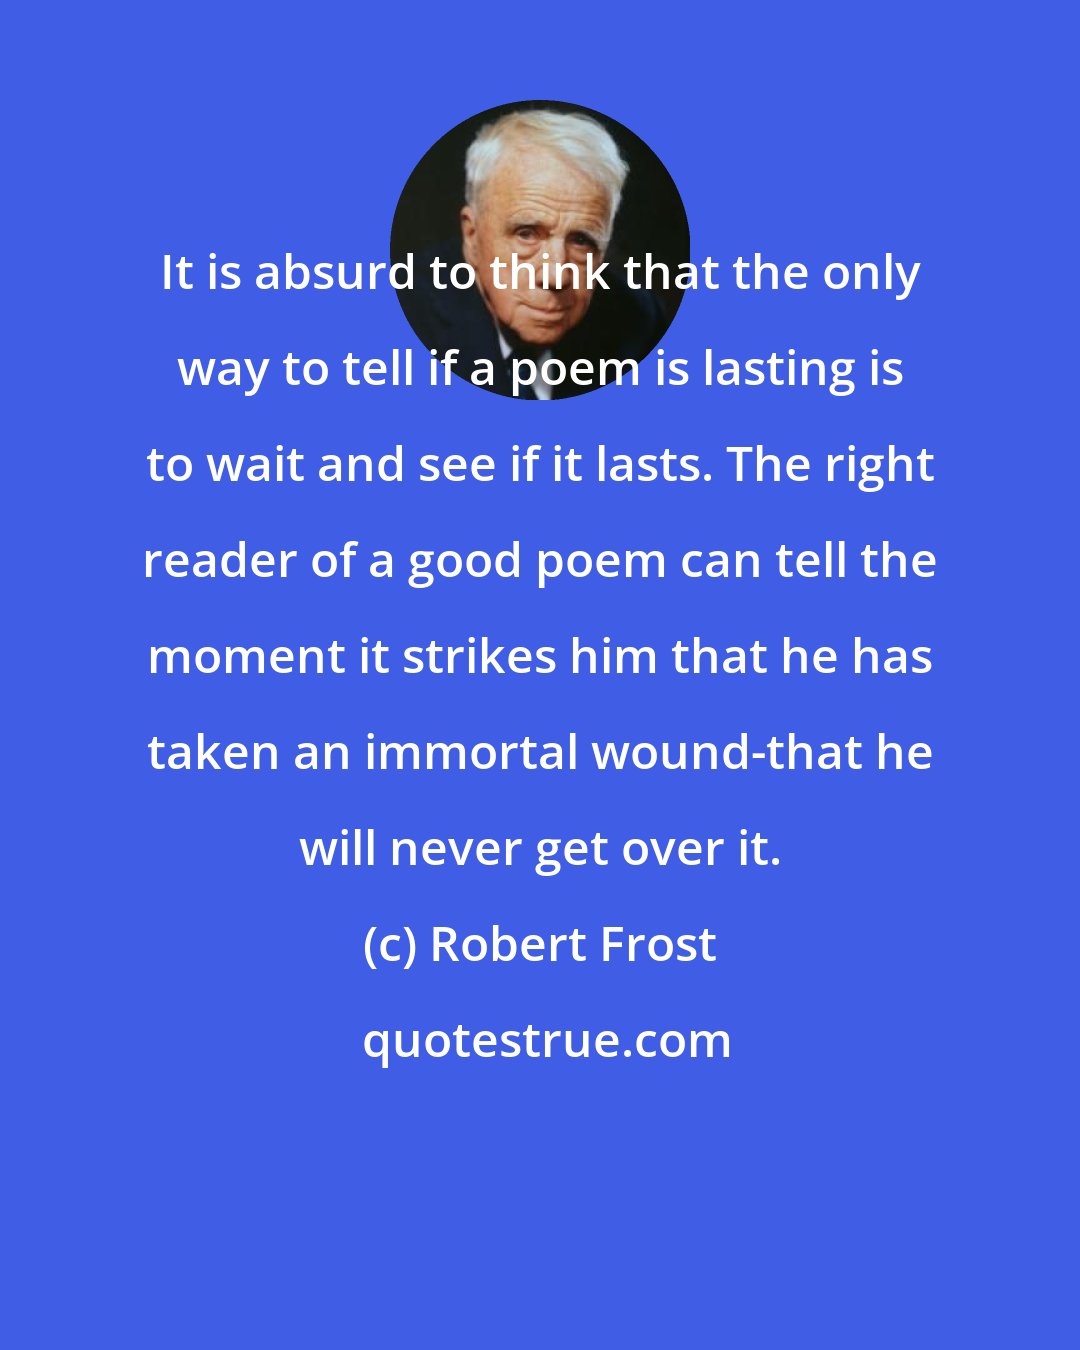 Robert Frost: It is absurd to think that the only way to tell if a poem is lasting is to wait and see if it lasts. The right reader of a good poem can tell the moment it strikes him that he has taken an immortal wound-that he will never get over it.